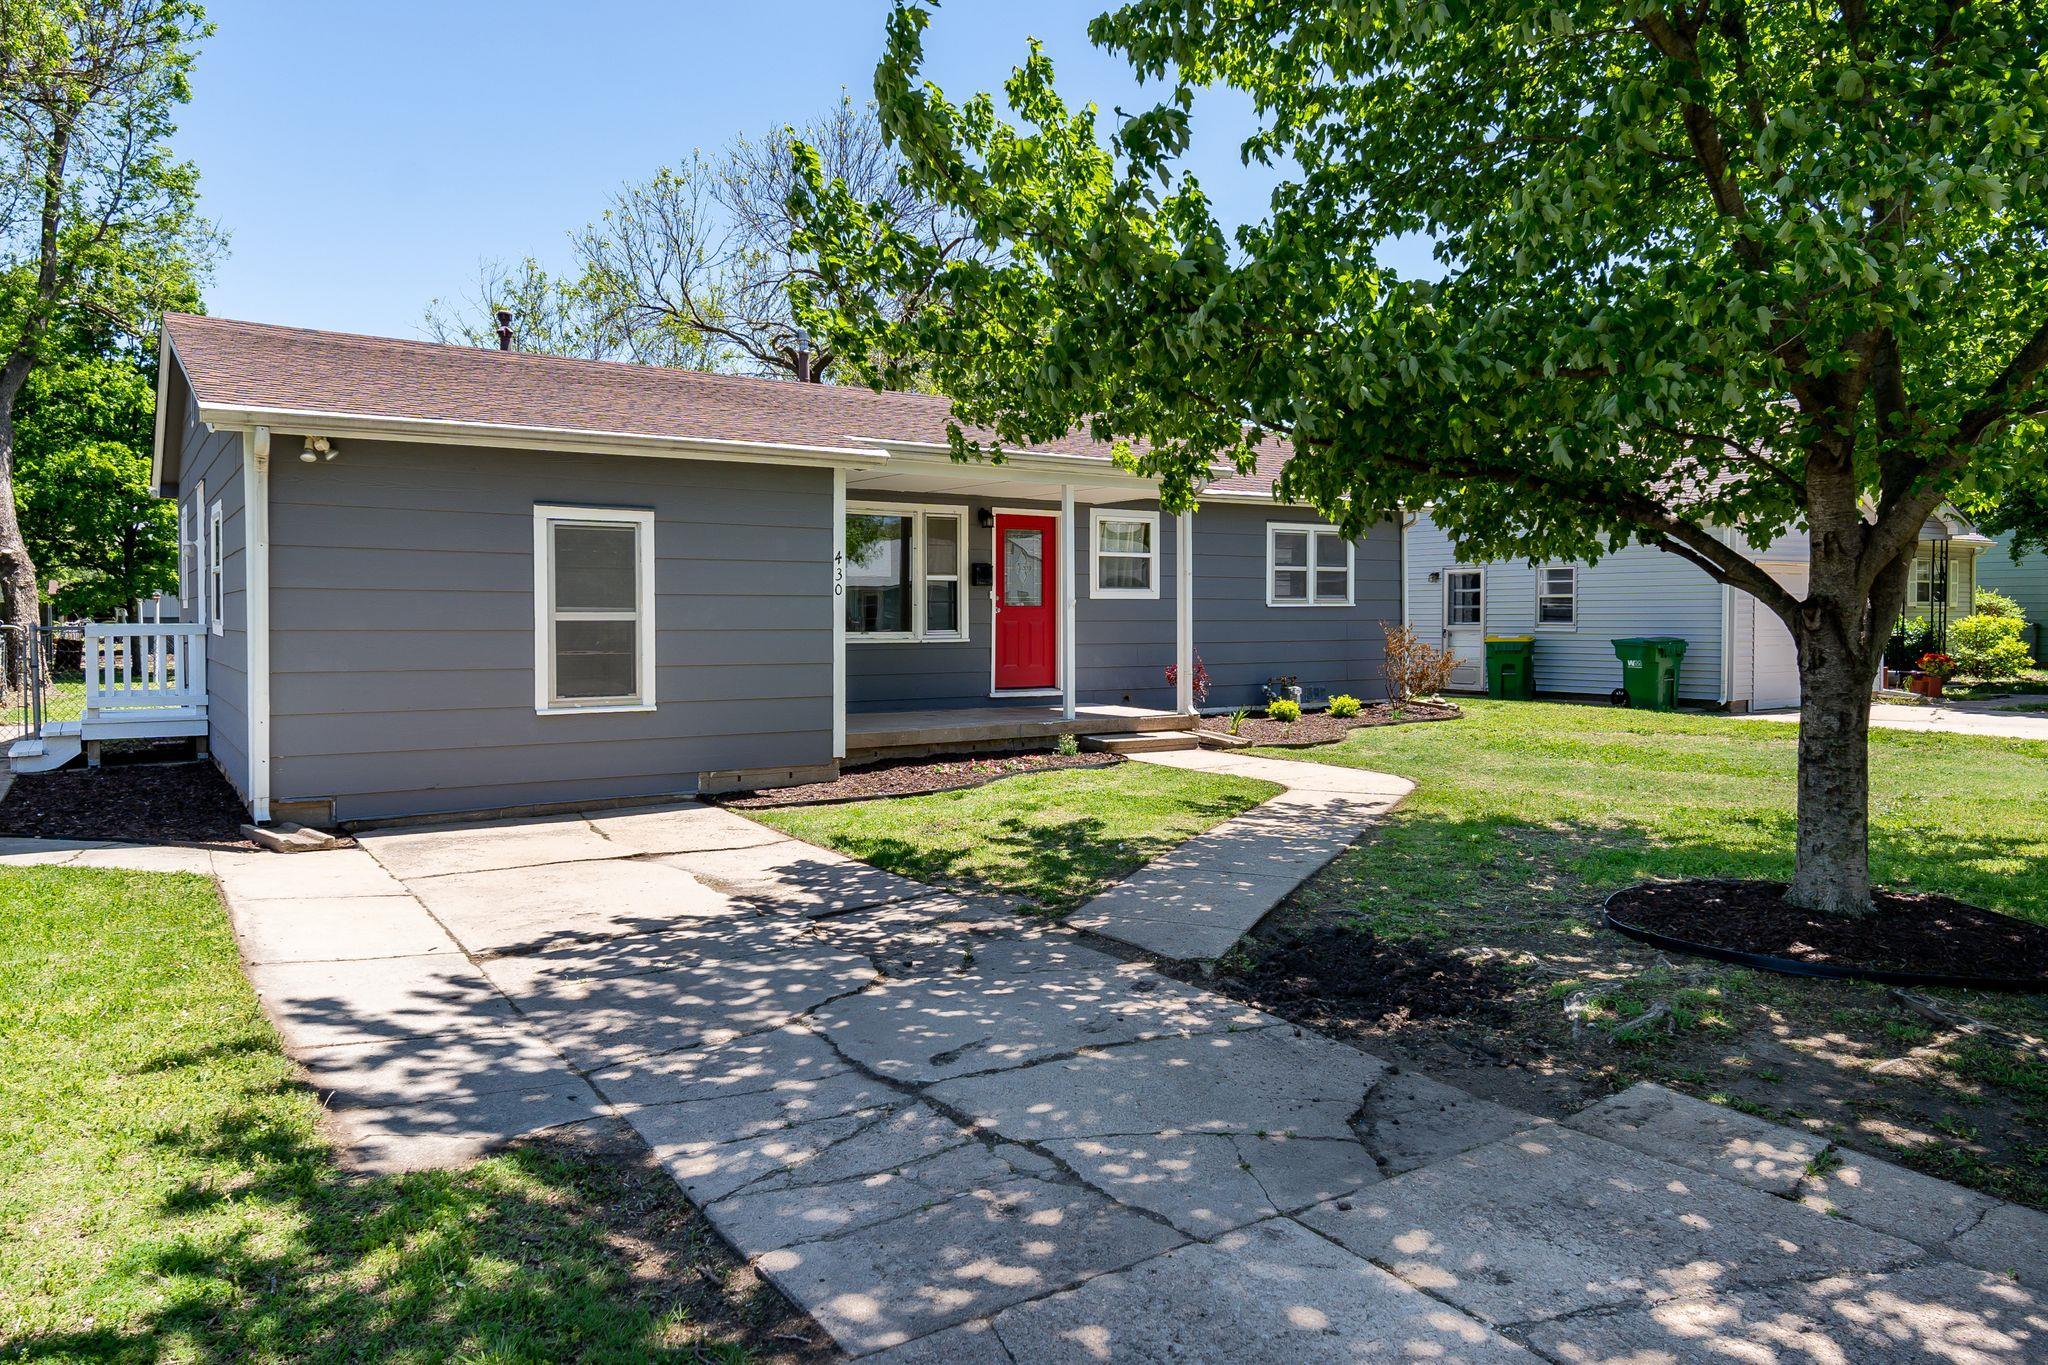 Completely remodeled 4 bedroom 1 bath home located in Valley Center. Look at those hardwood floors! 